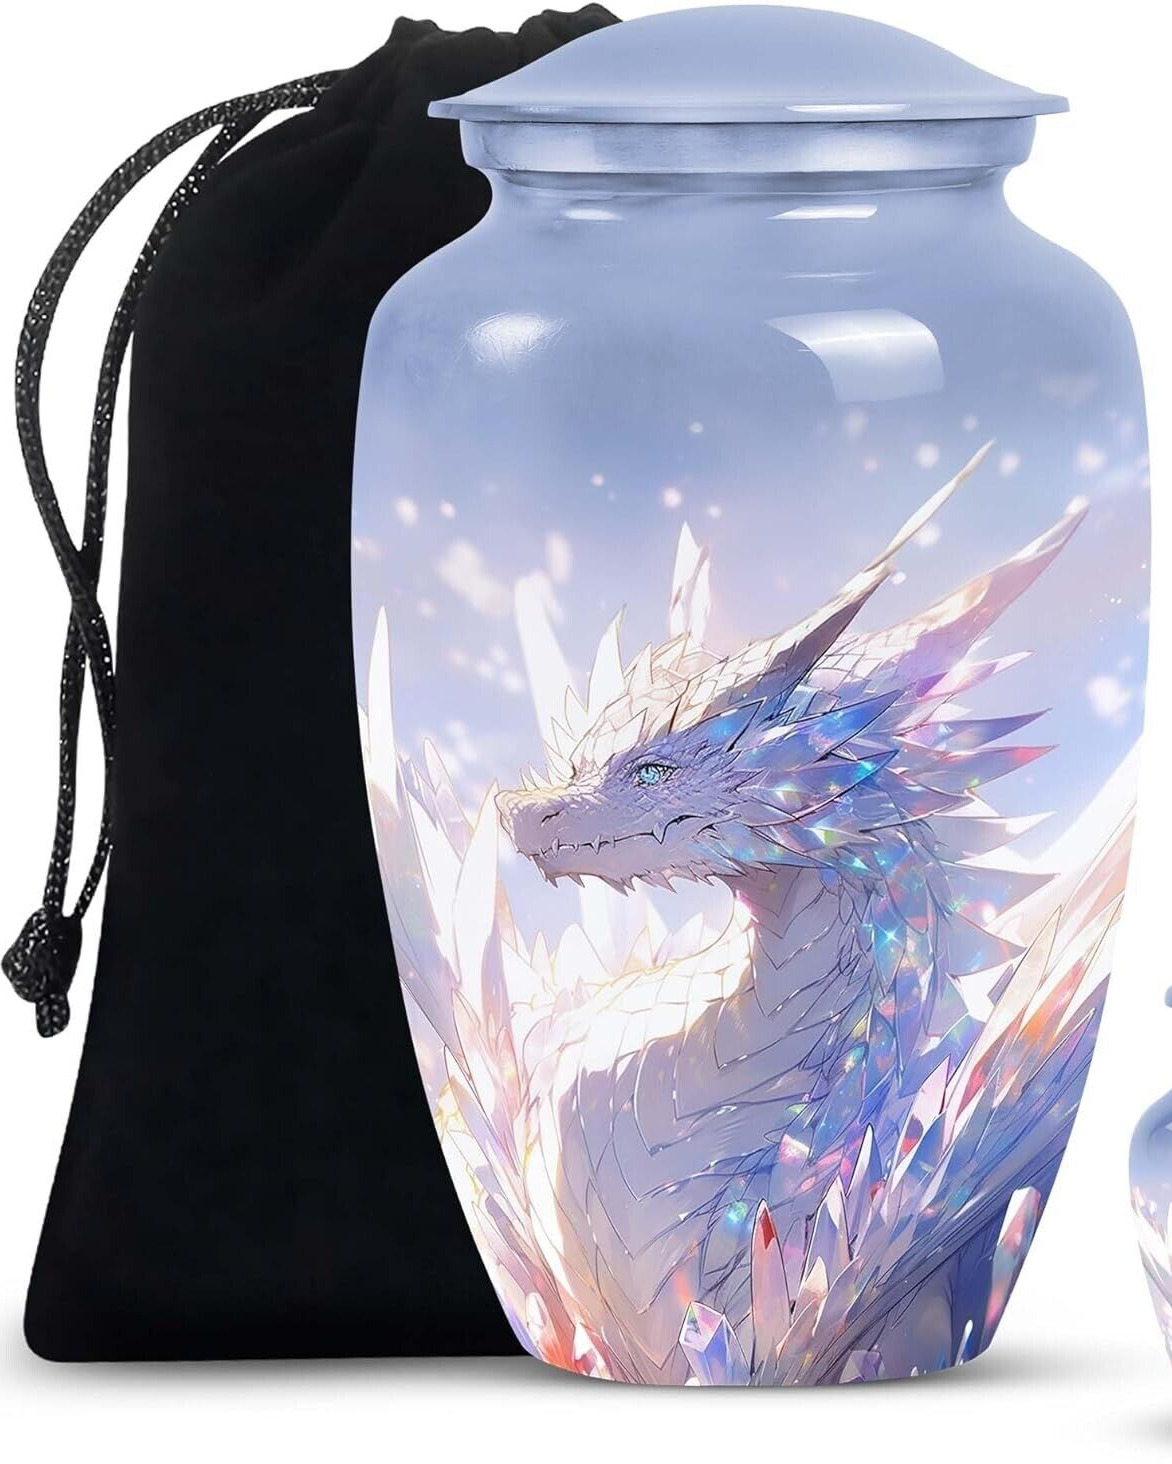 The Crystal Dragon Big Cremation Urns for Human Ashes Keepsake Memorial Funeral